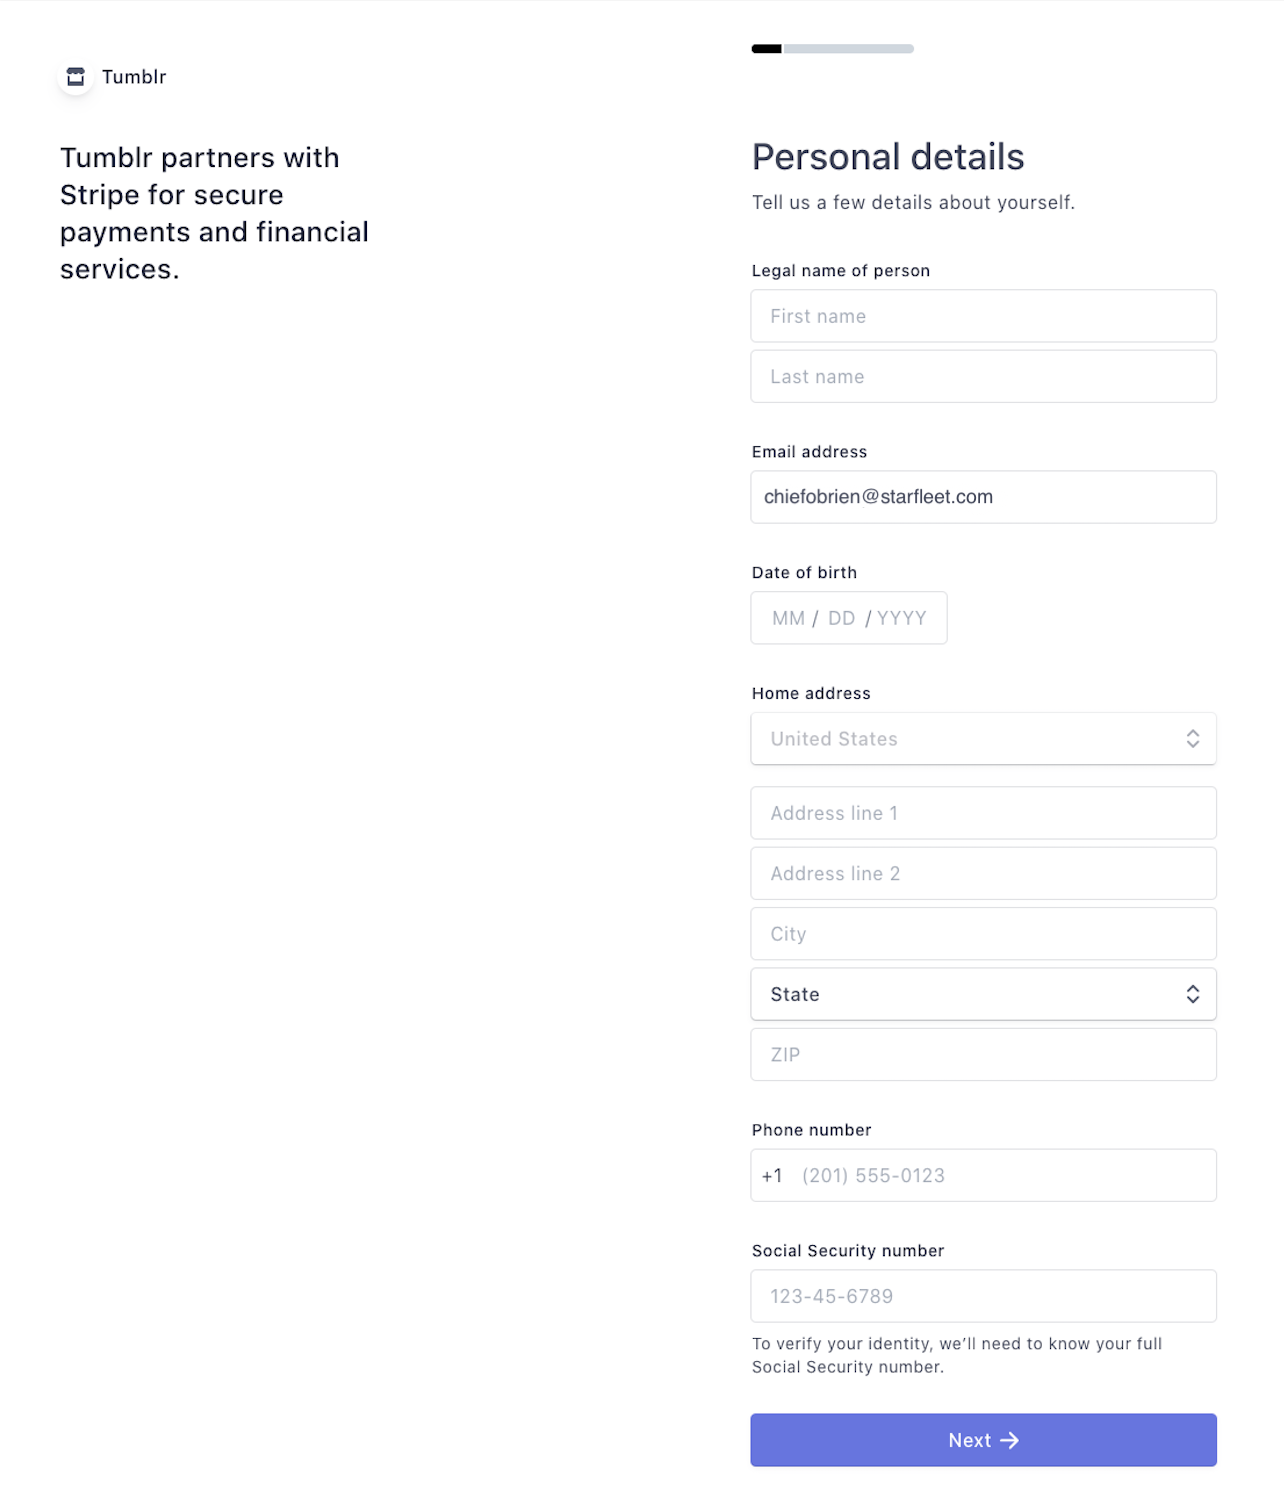 Stripe's Personal details form. The form asks for your name, email, date of birth, home address, phone number, and social security number.